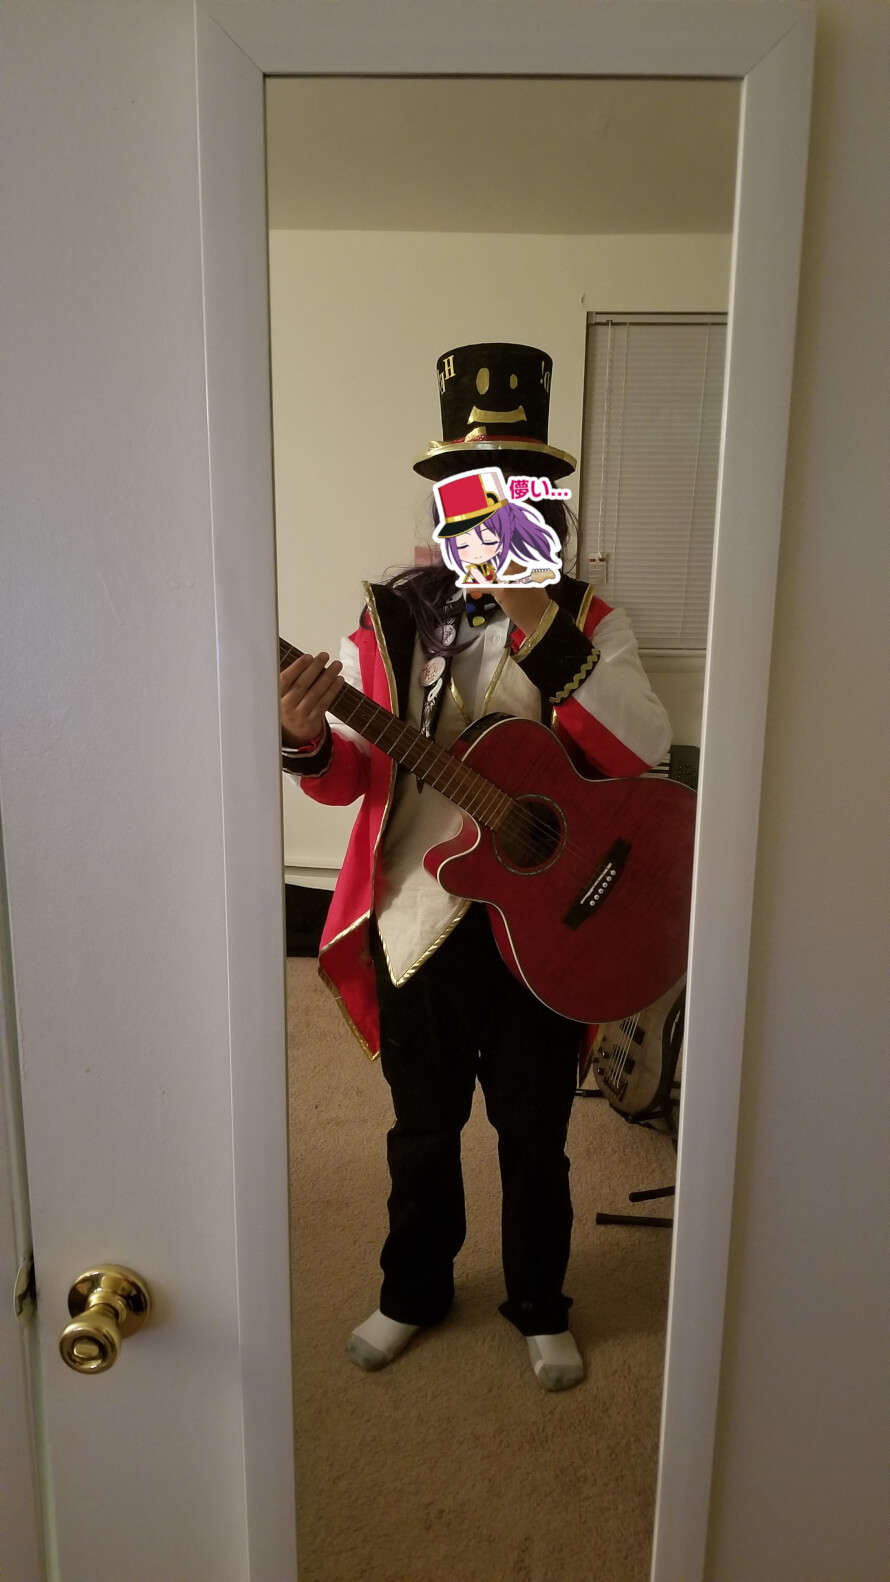 My Stand, ［ＦＬＥＥＴ　ＦＯＸＥＳ］ IS UNBEATABLE!!!

My Halloween costume is finally finished! This thing has...